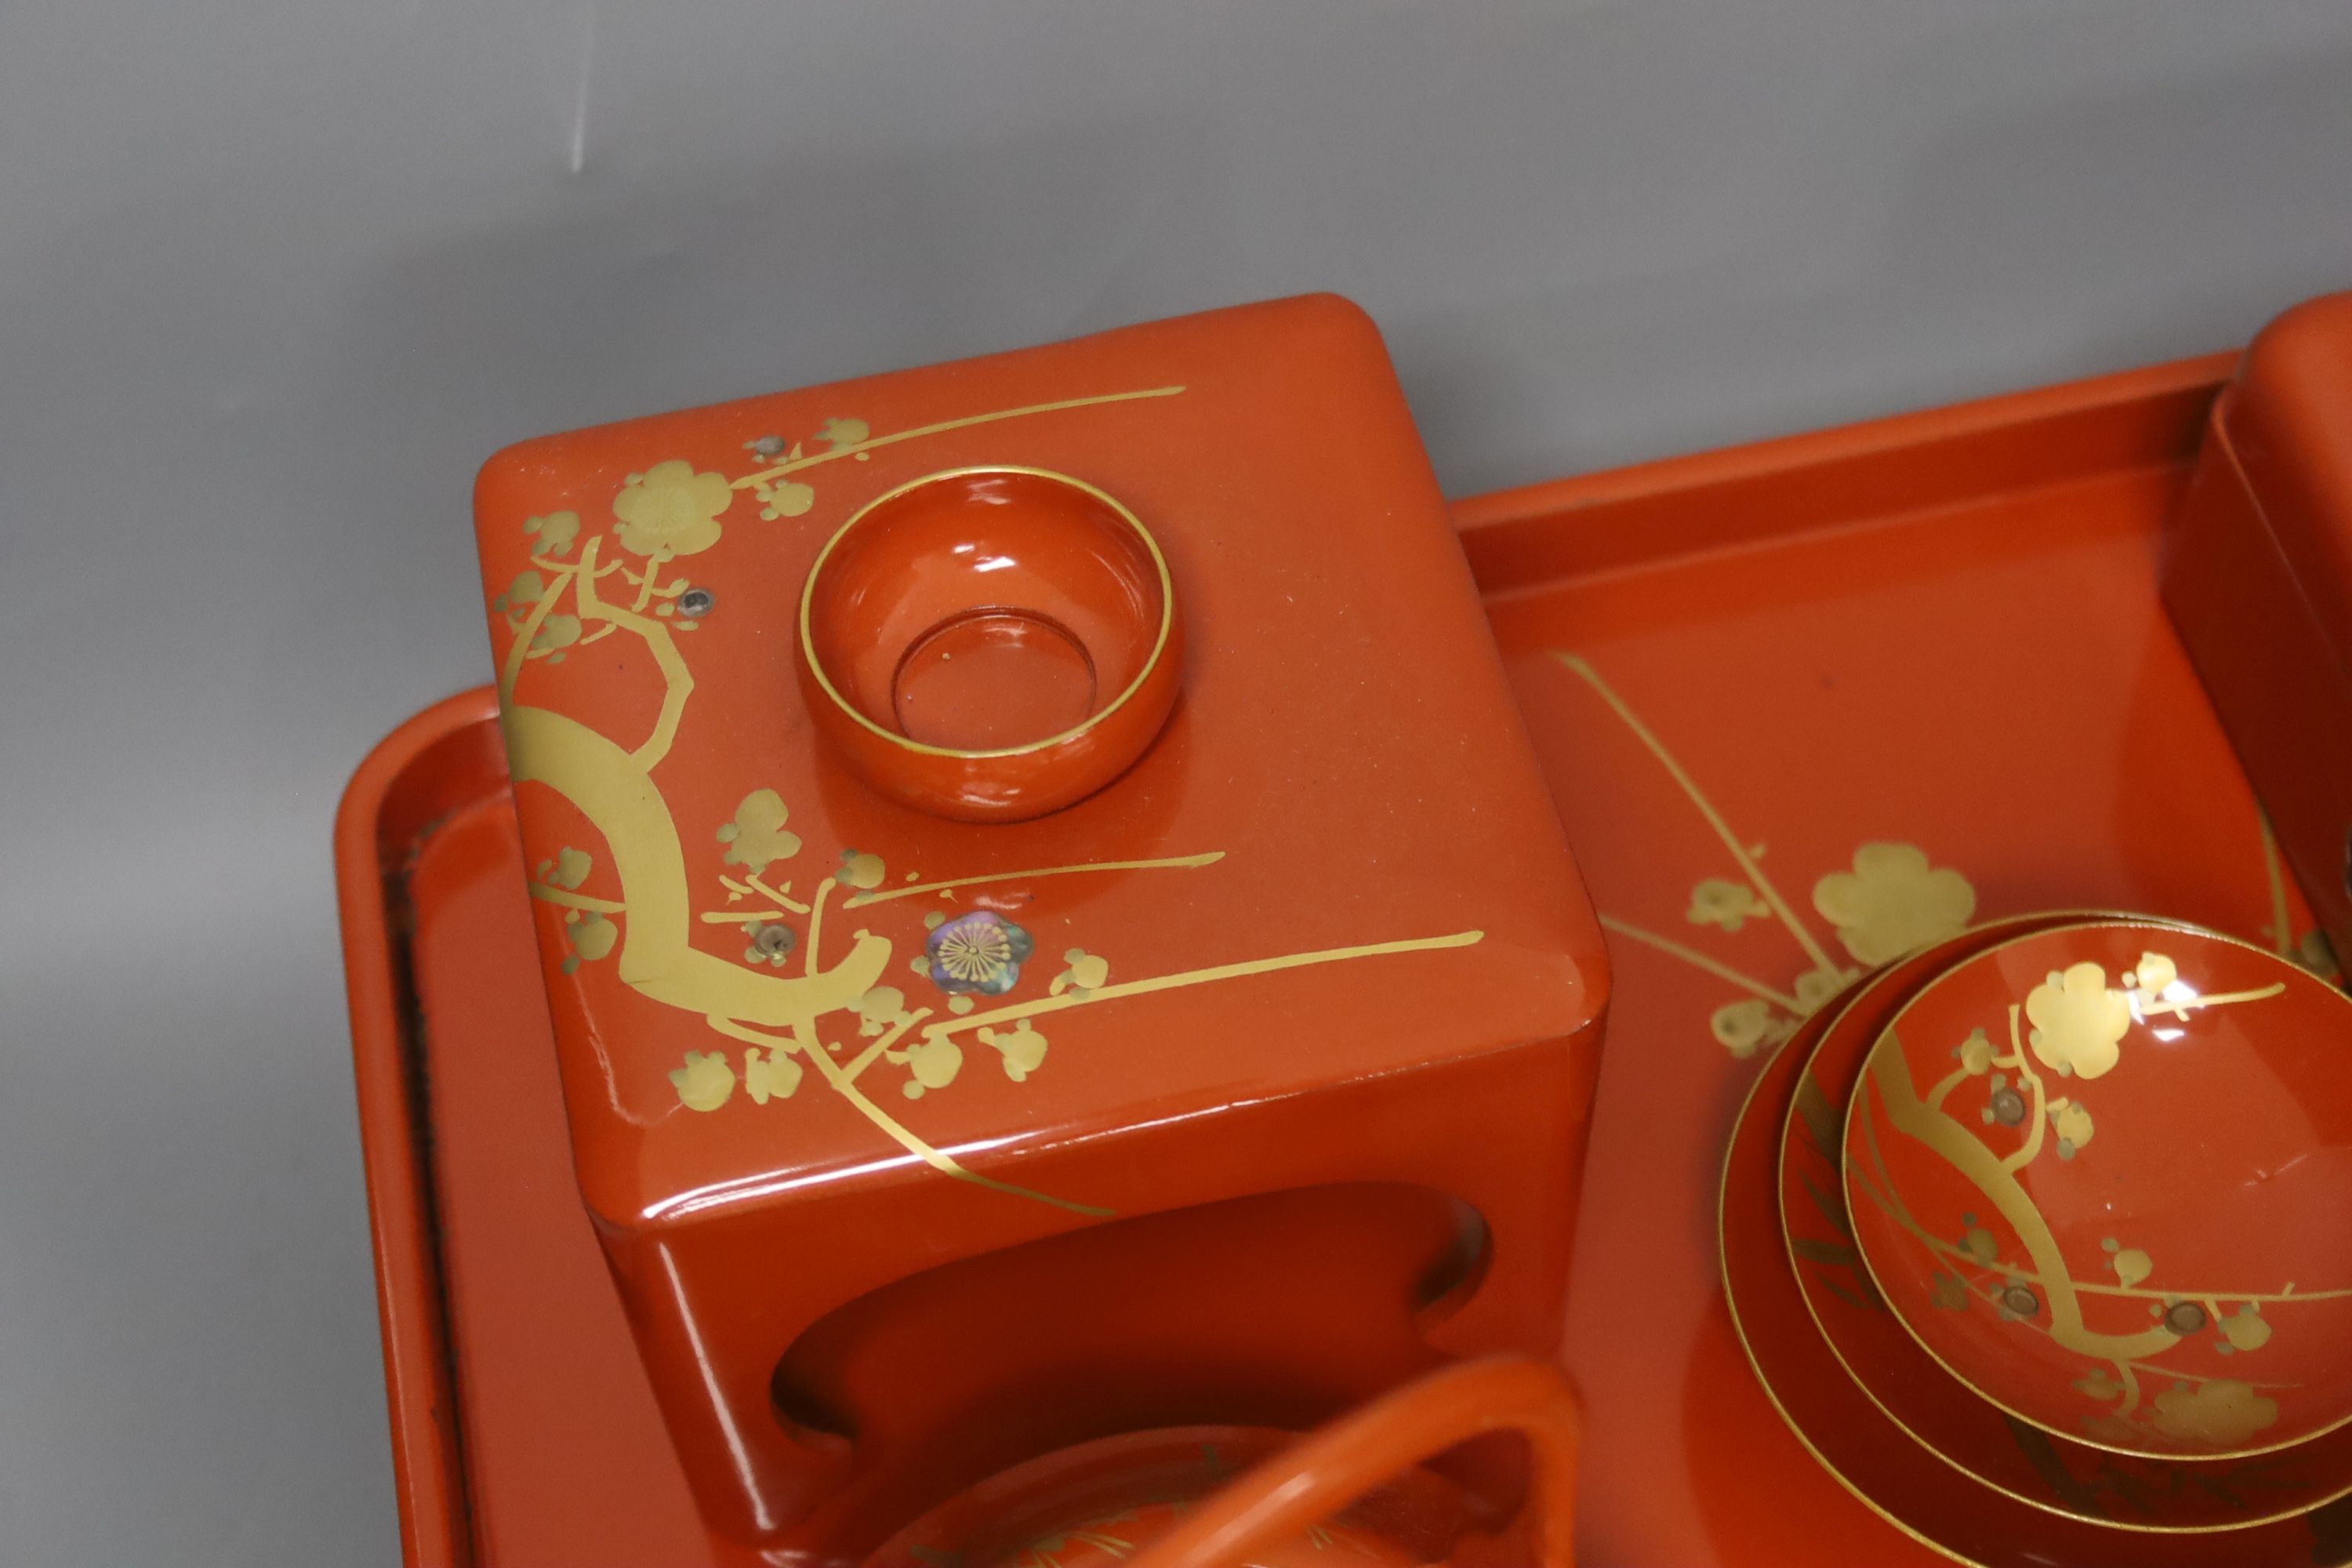 A Japanese red lacquer ceremonial sake set